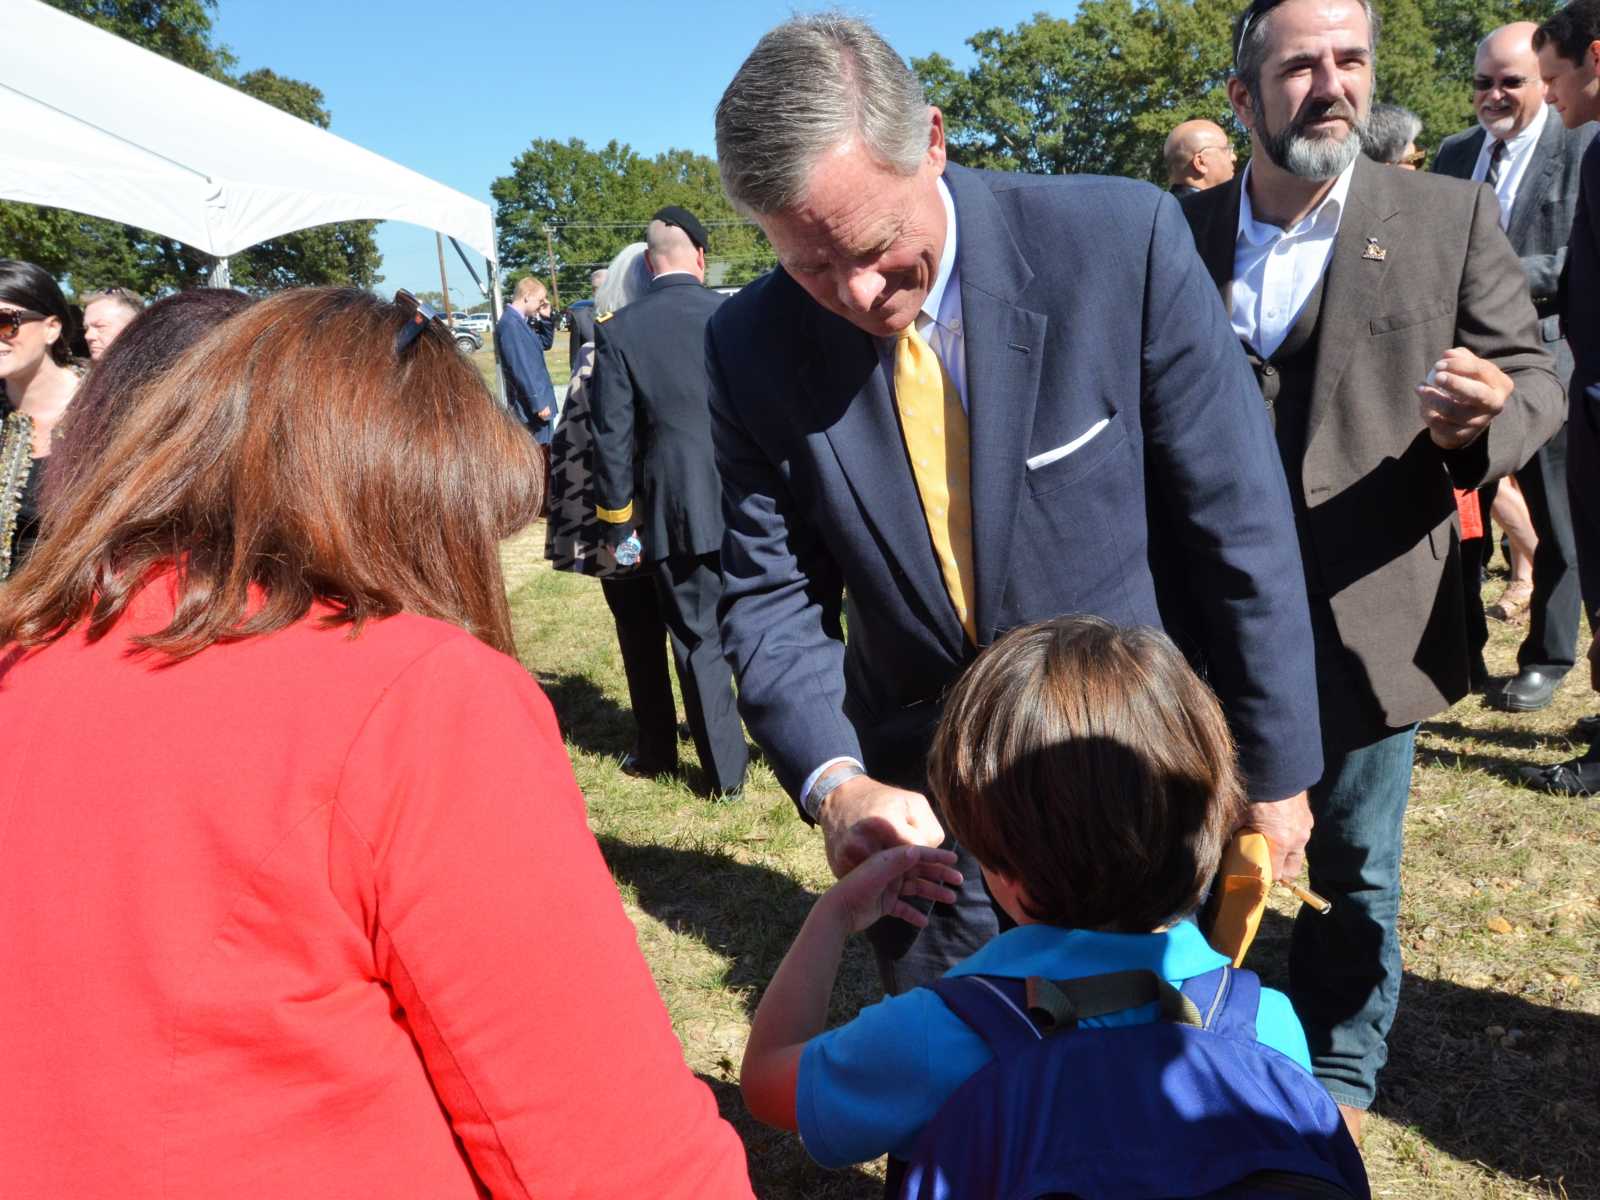 man in suit leans over to shake hand of young boy who is wearing a backpack with adults surrounding